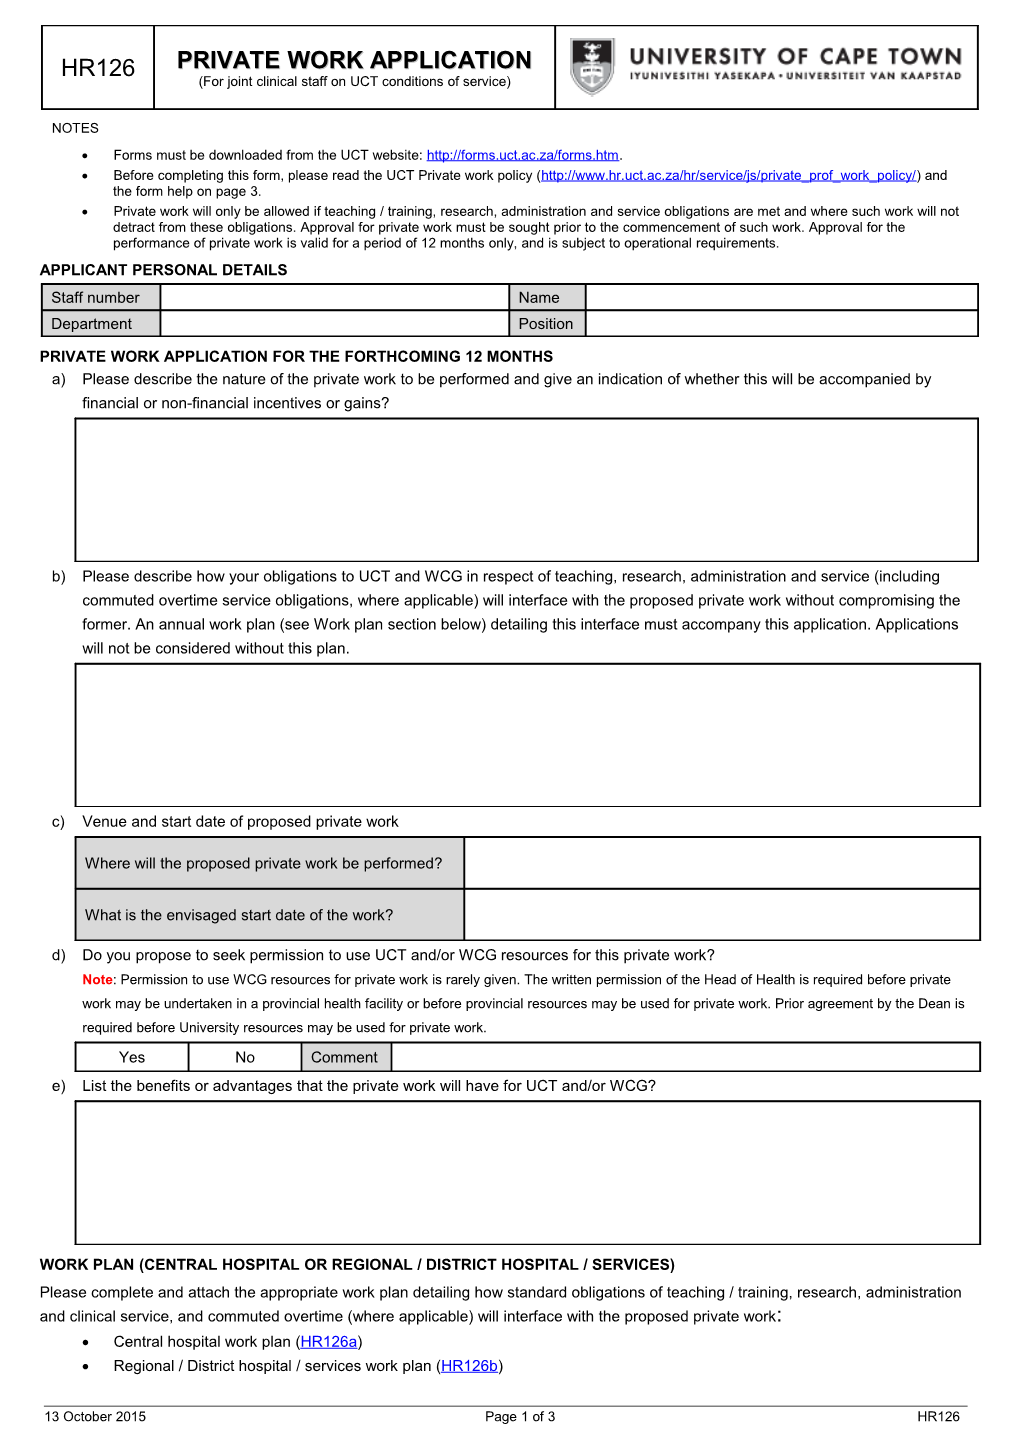 Private Work Application (For Joint Staff on UCT Conditions of Service)